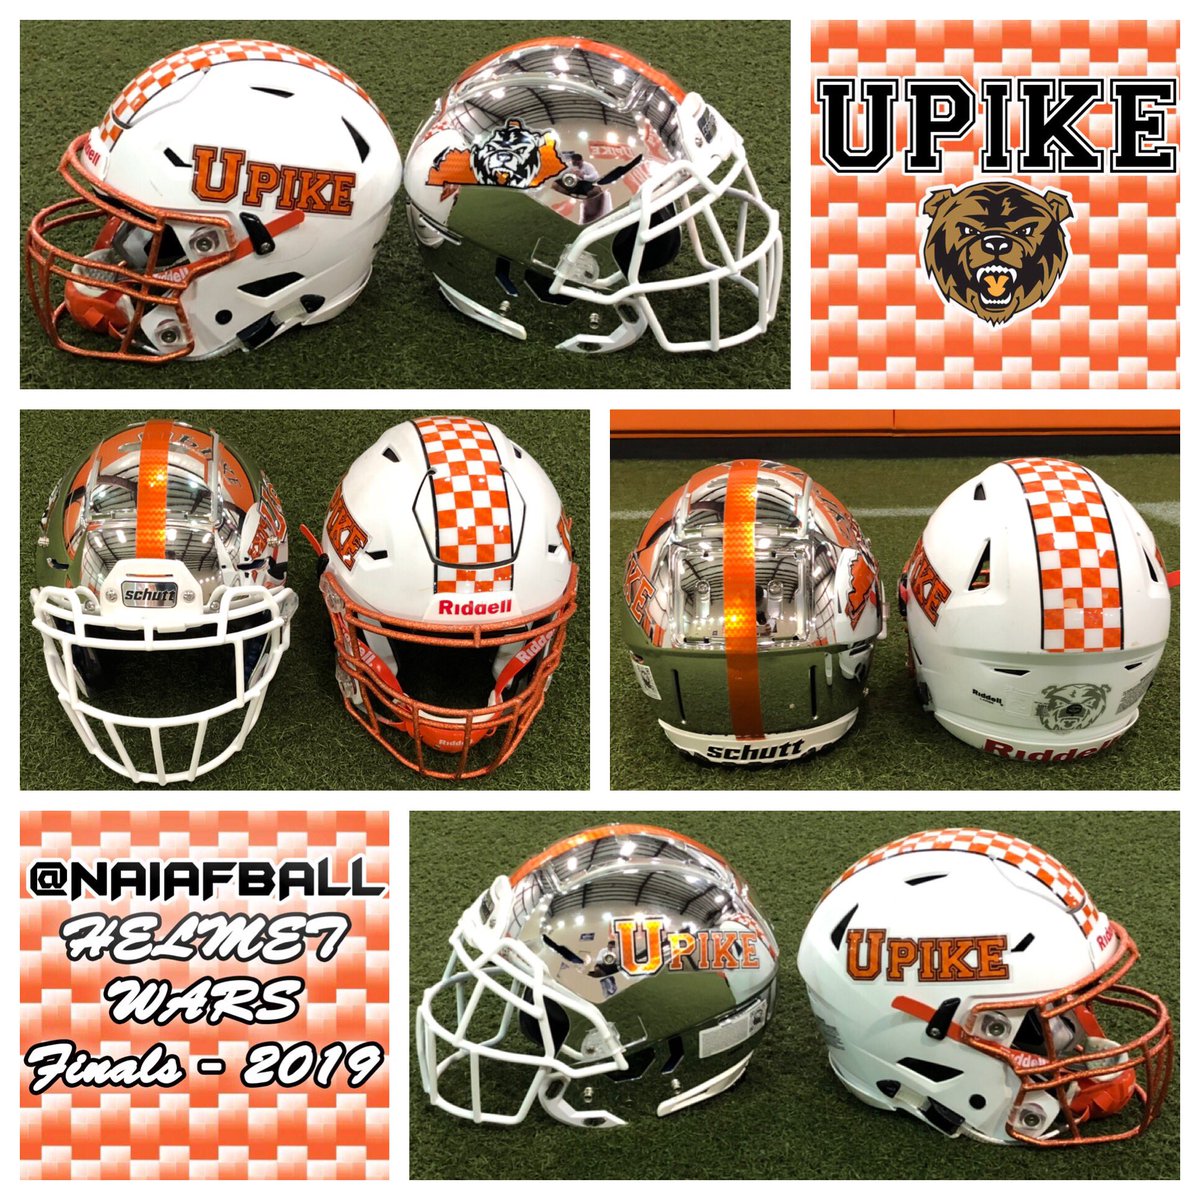 With so many new helmets in the NAIA, would you guys want to do another round of Helmet Wars this offseason? The previous champion for the best helmet in the NAIA was @UPIKEAthletics 🐻.